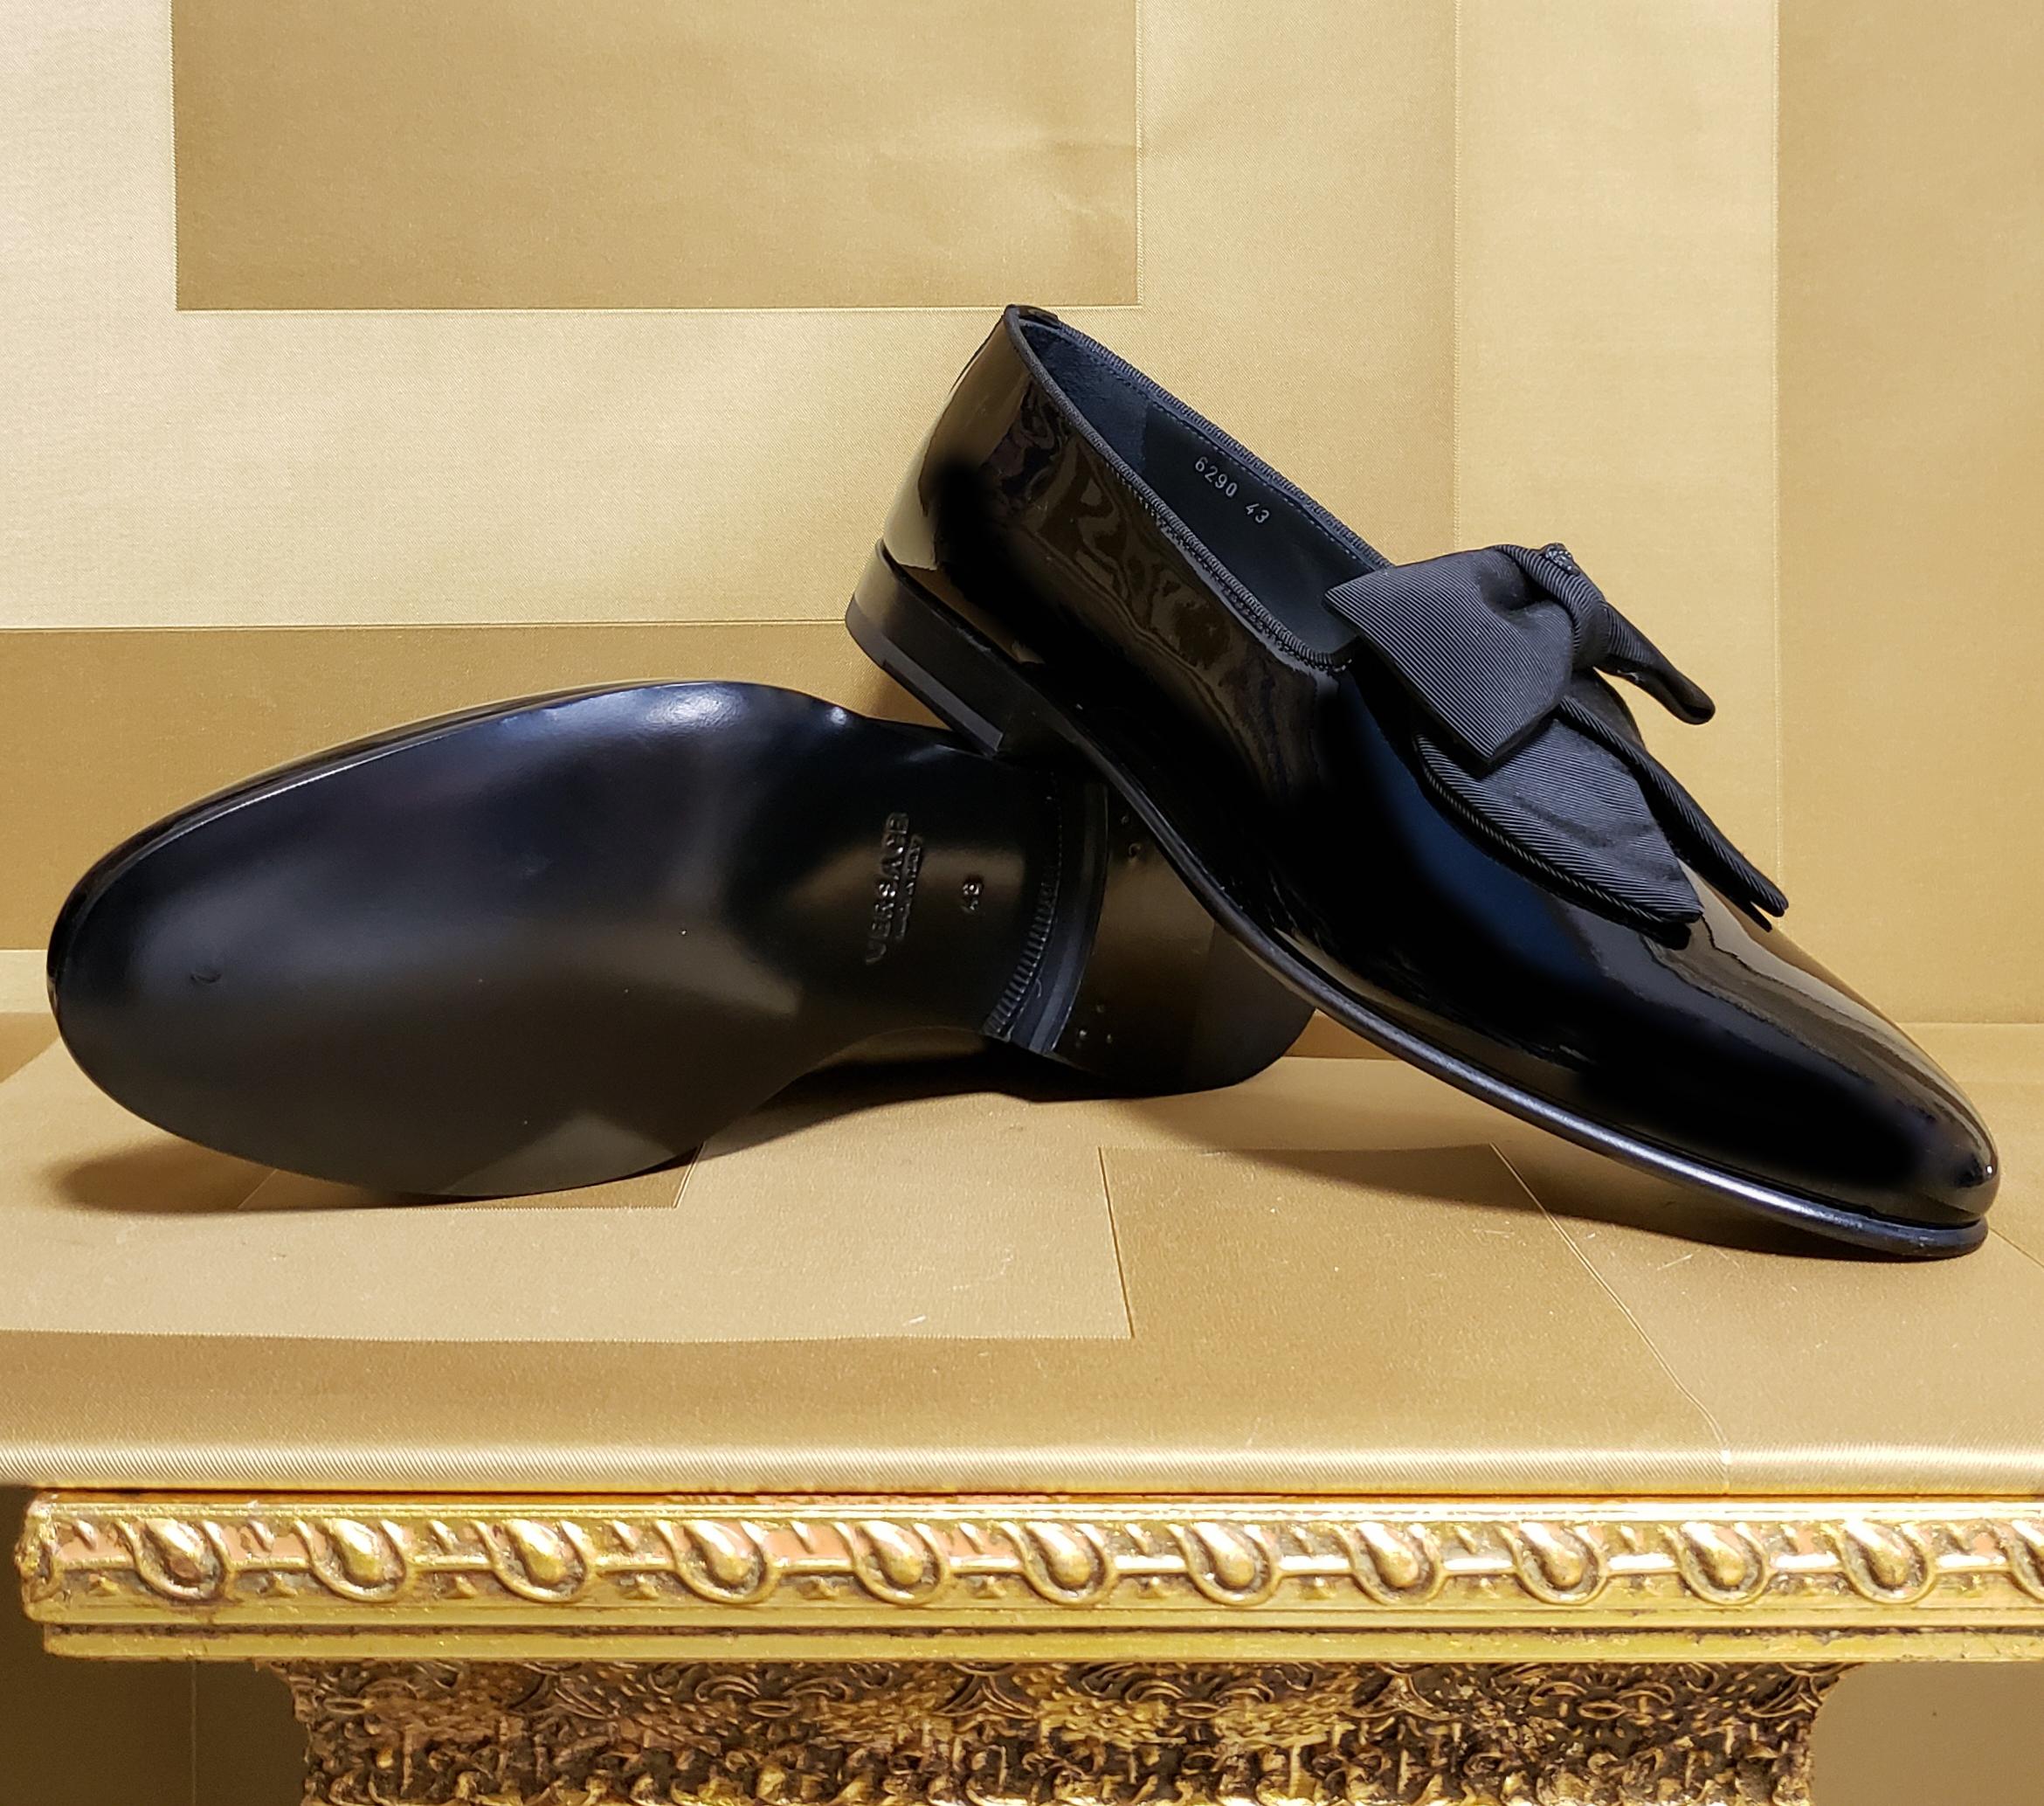  VERSACE


BLACK PATENT LEATHER LOAFER SHOES


Content: patent leather


Lining: 100% leather


Made in Italy


Italian Size is 43 - US 10
       
Brand new. Comes with Versace box and Versace signature Dust Bag.

 100% authentic guarantee 
PLEASE